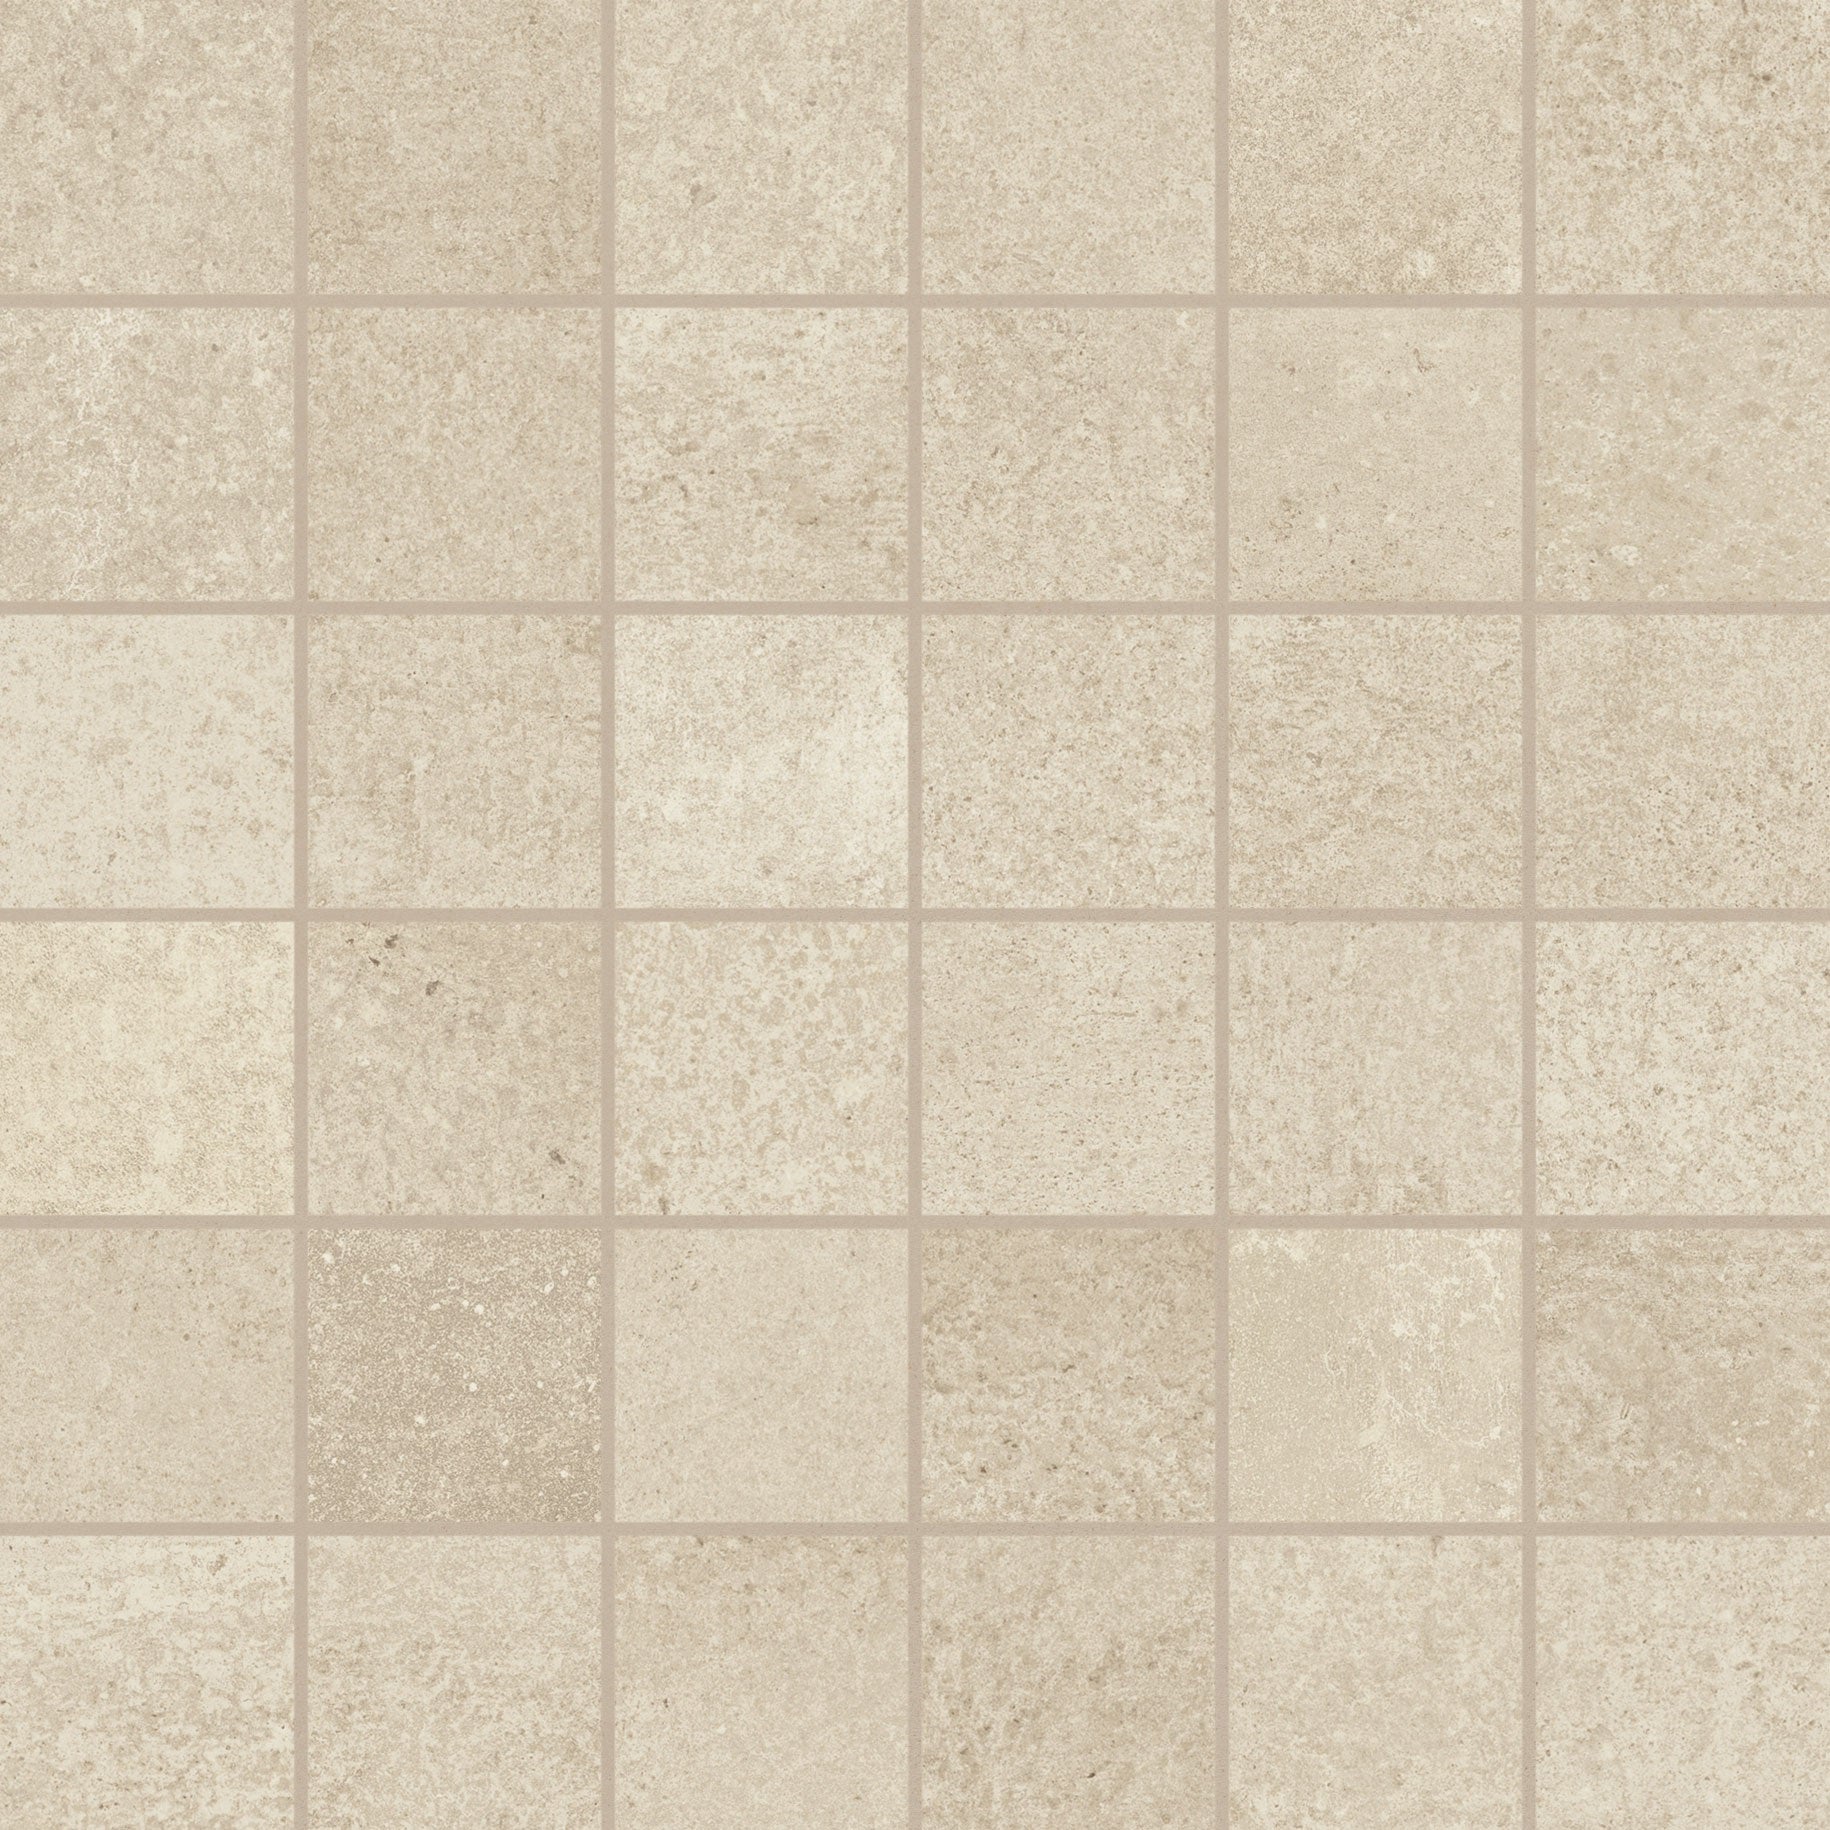 landmark 9mm madein heritage beige 12'x12" straight stack 2x2 mosaic 12x12x9mm matte rectified porcelain tile distributed by surface group international